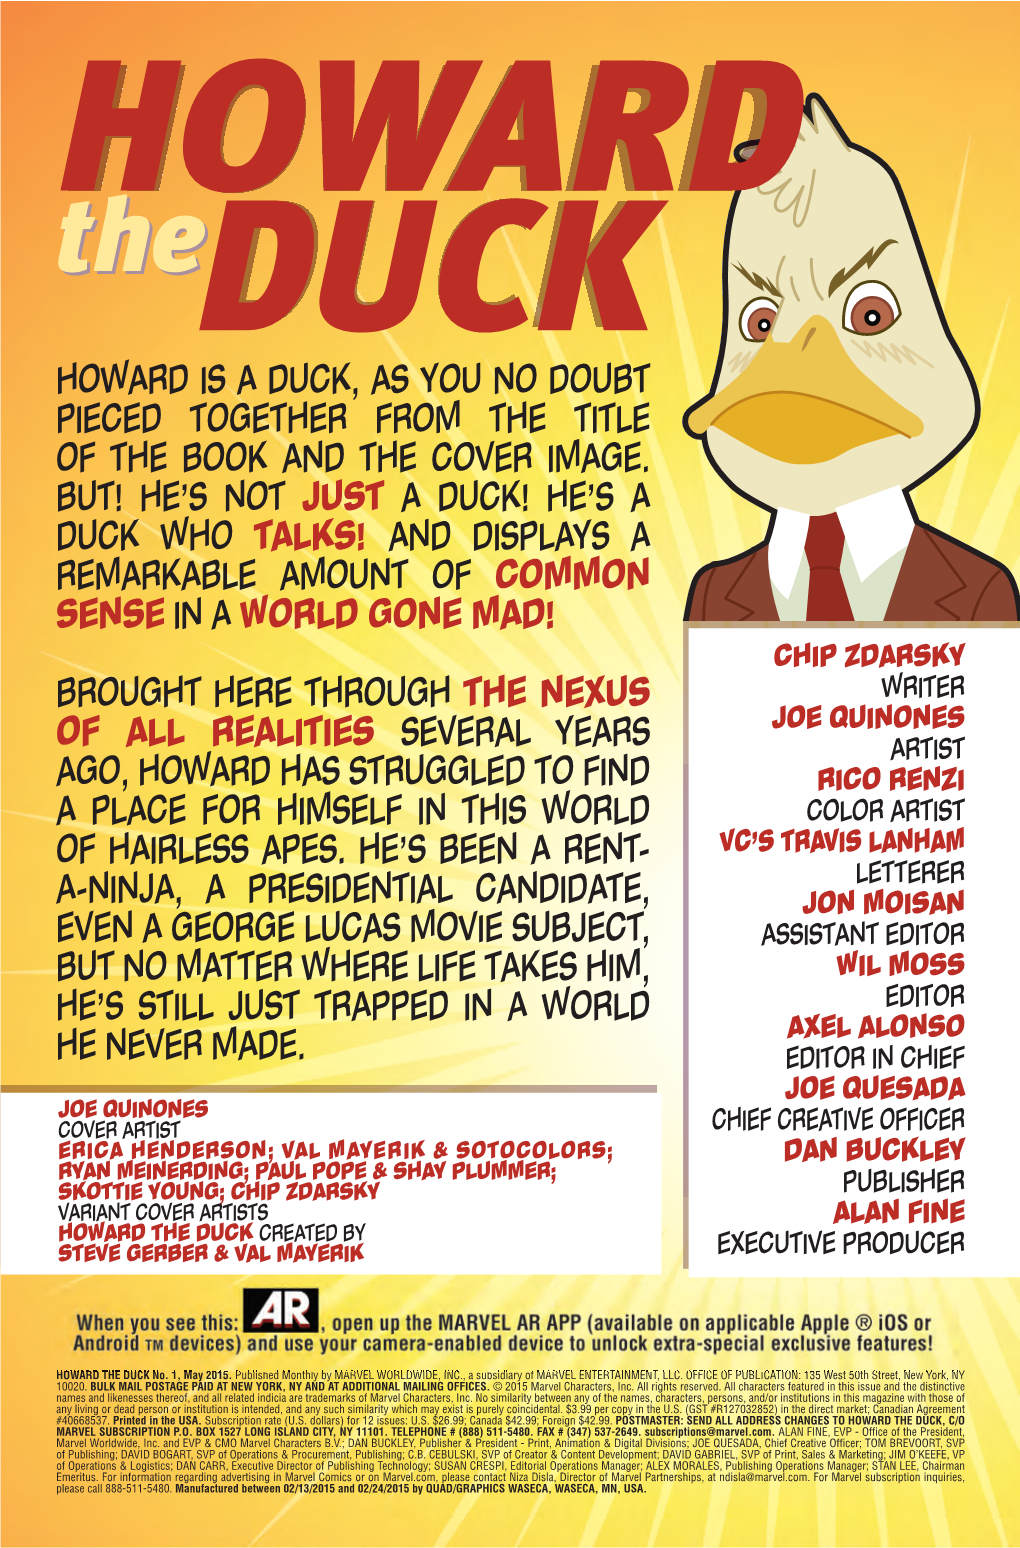 Howard Is a Duck, As You No Doubt Pieced Together from the Title of the Book and the Cover Image. But!